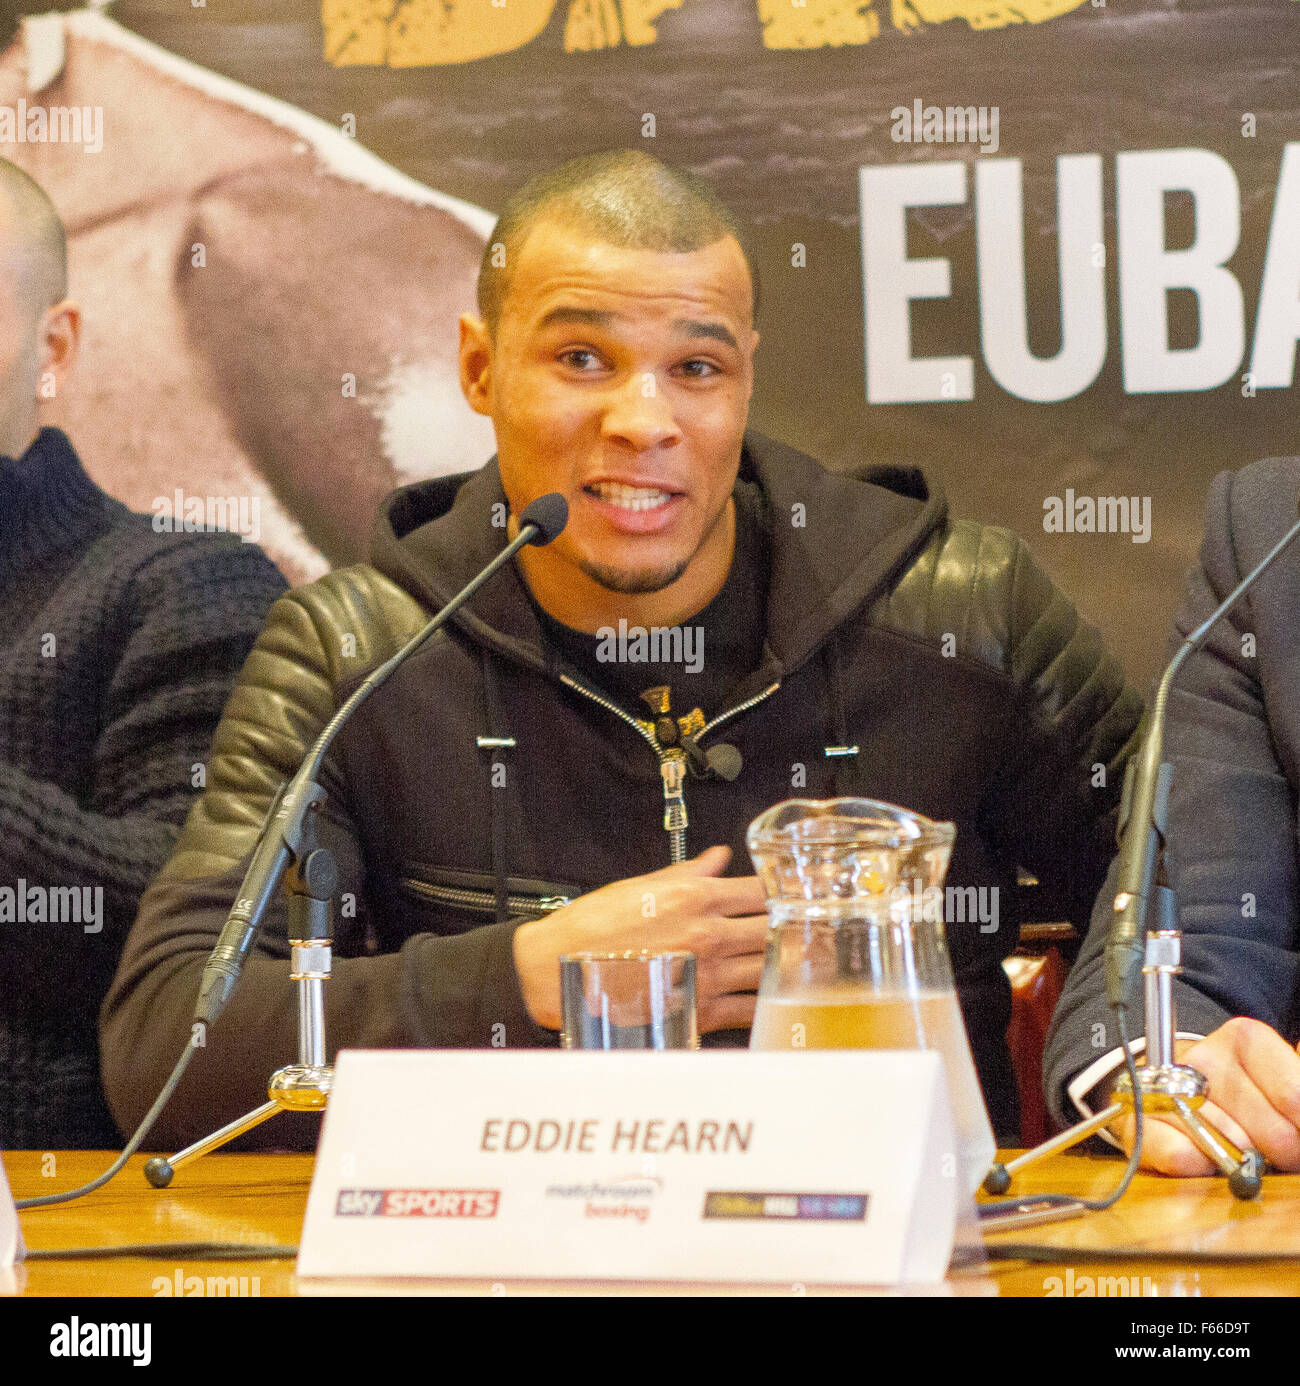 London, UK. 12th November 2015. Boxer Chris Eubank Jr at a press conference to promote his fight against Ireland’s Spike O’Sullivan on December 12th in London. Credit:  Paul McCabe/Alamy Live News Stock Photo